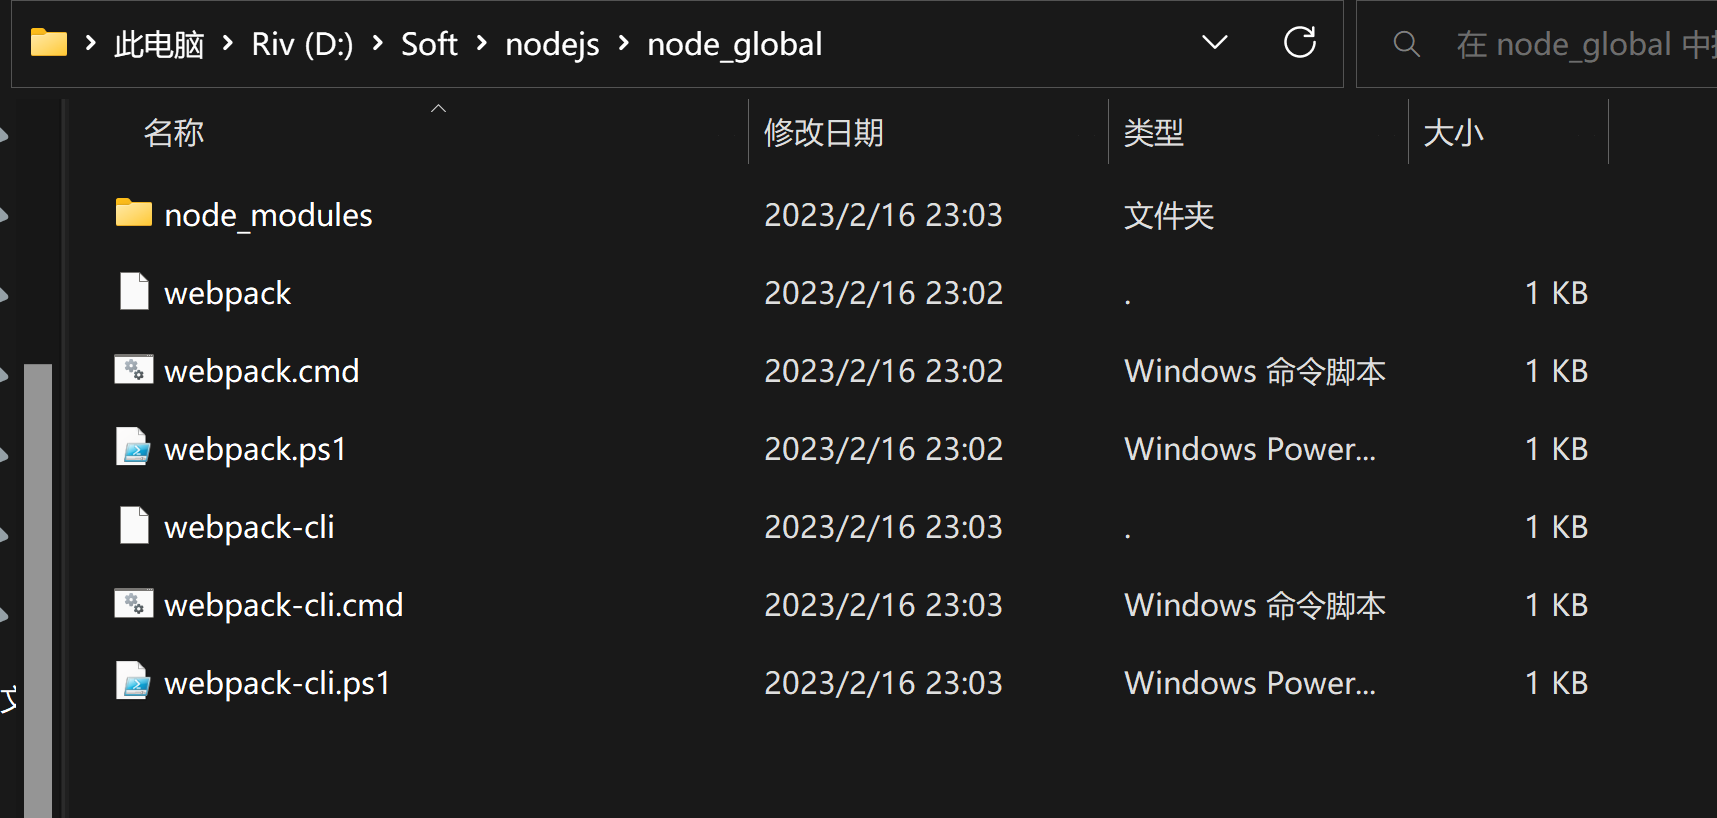 Installing and Configuring Node.js on Windows